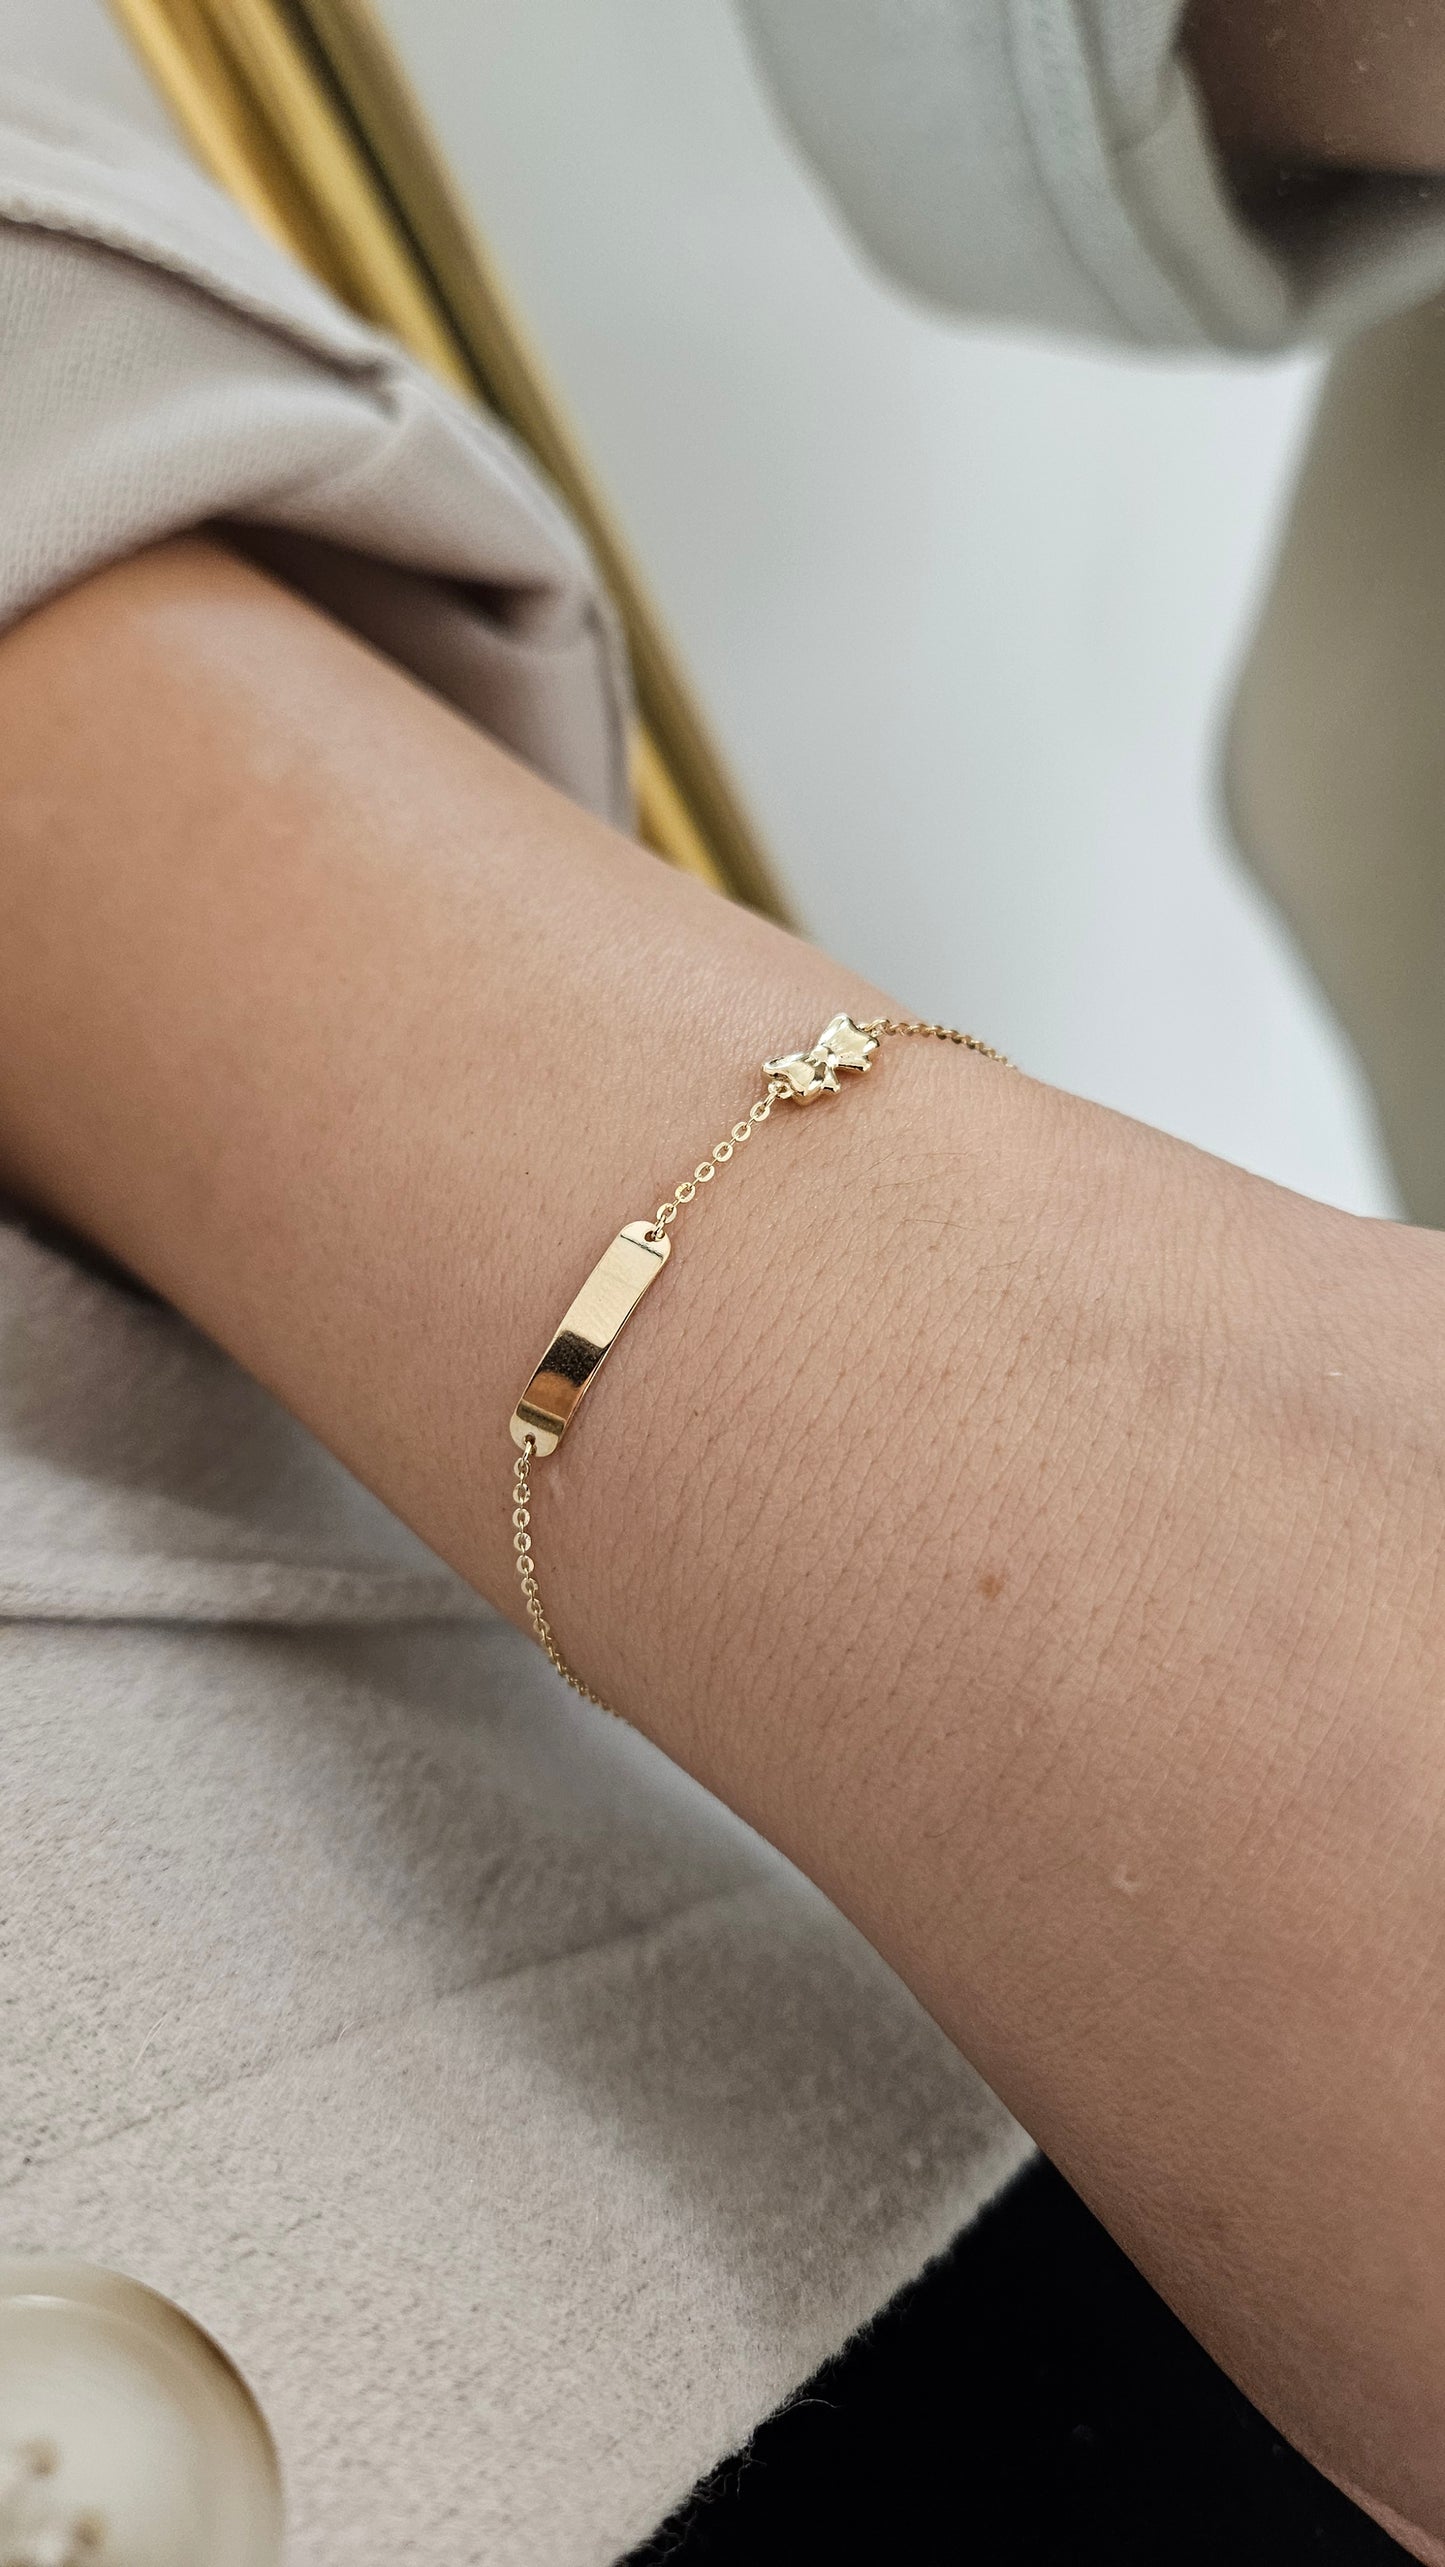 Baby ID Bracelet with Bow 14K Gold